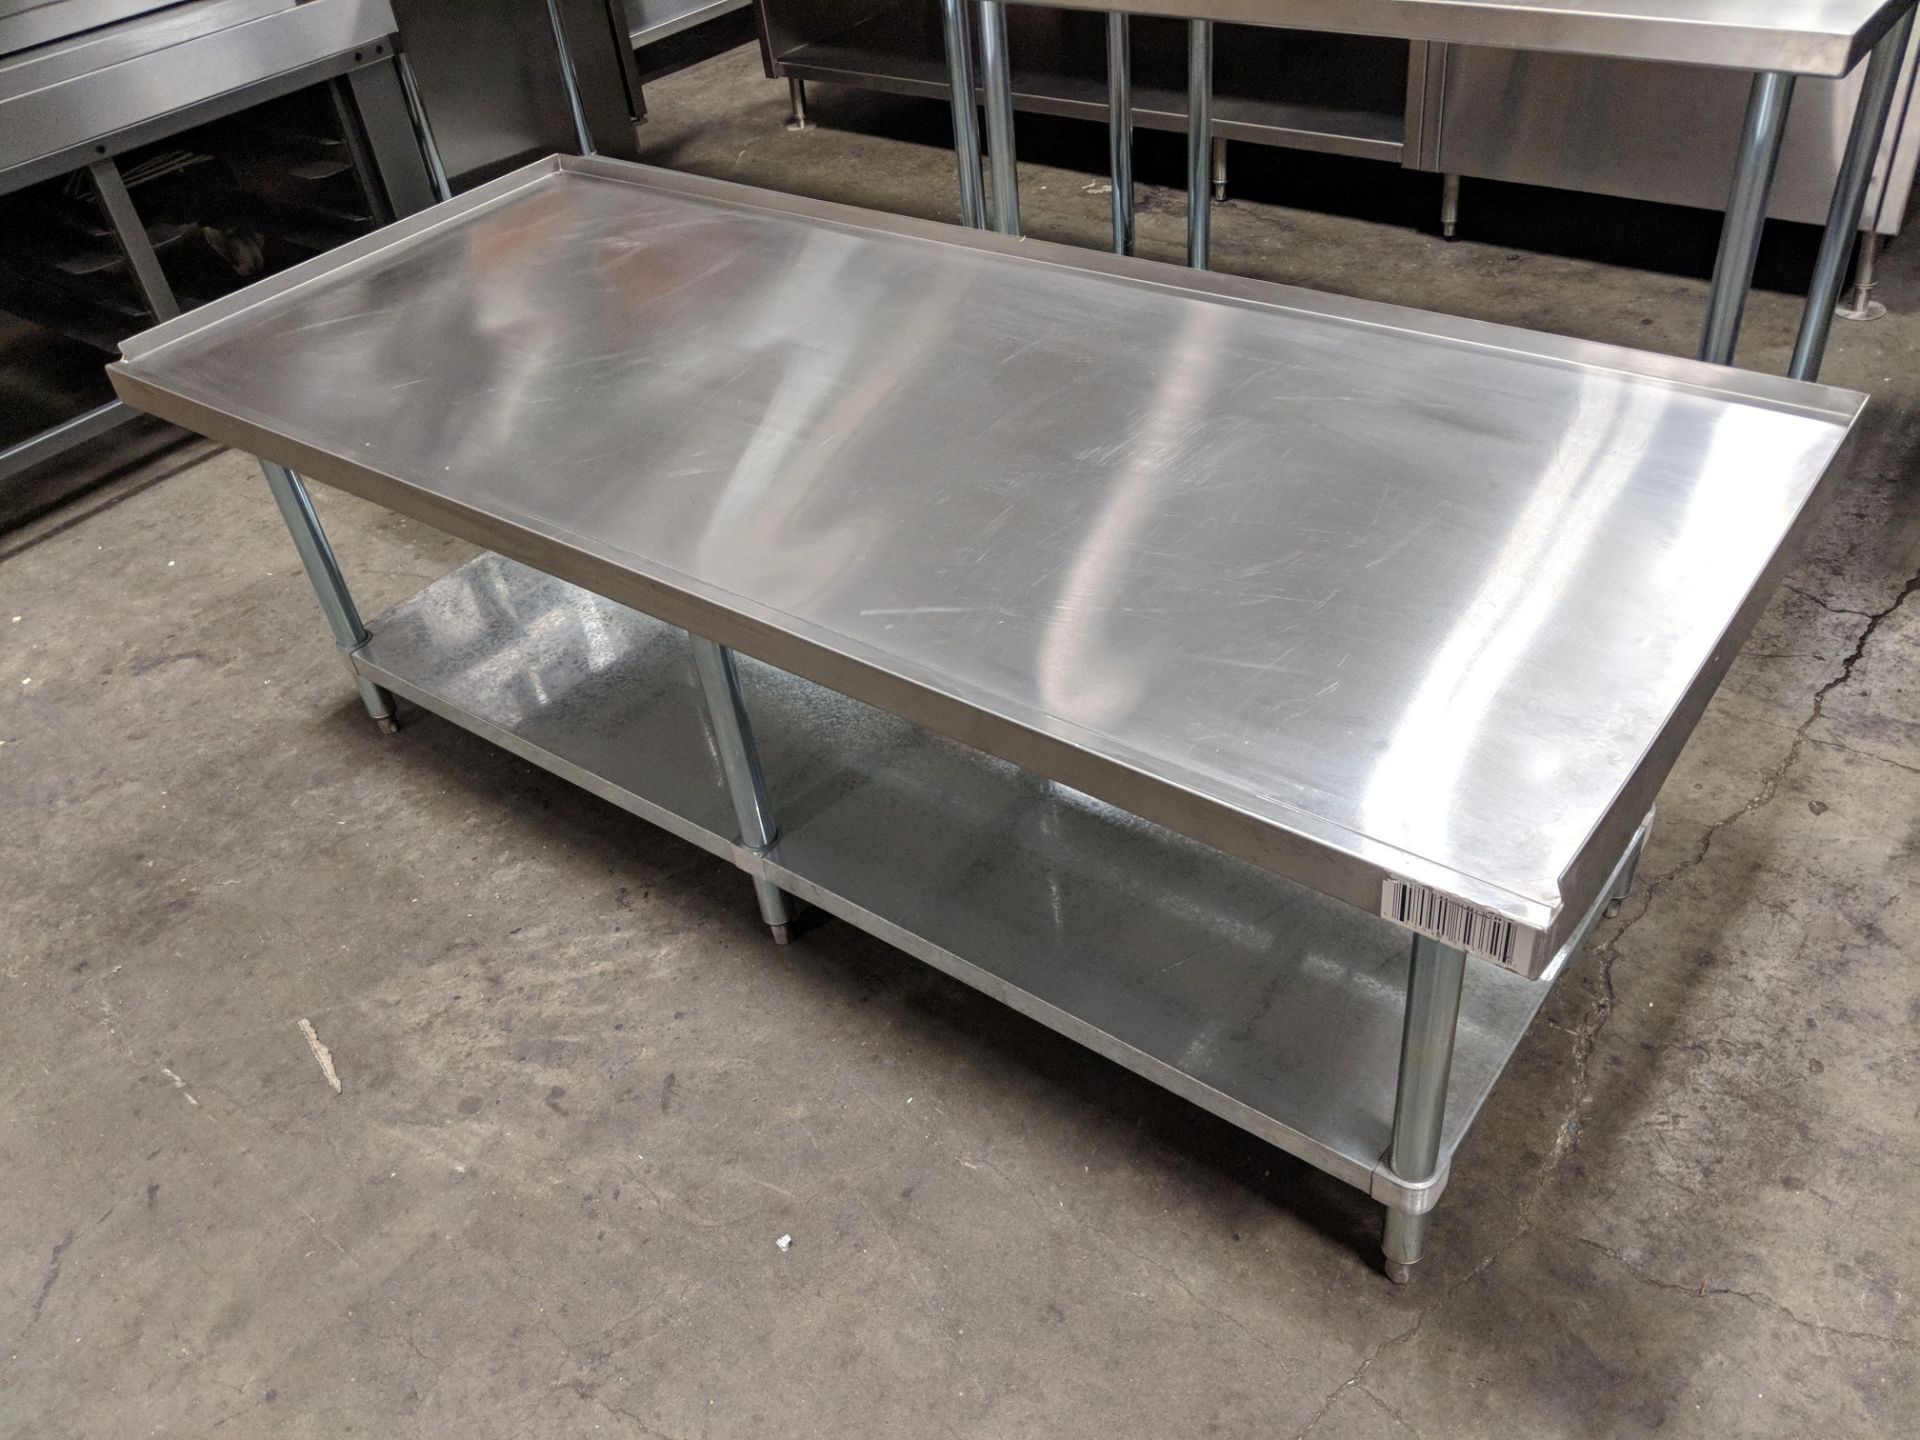 30" x 72" Stainless Steel Equipment Stand